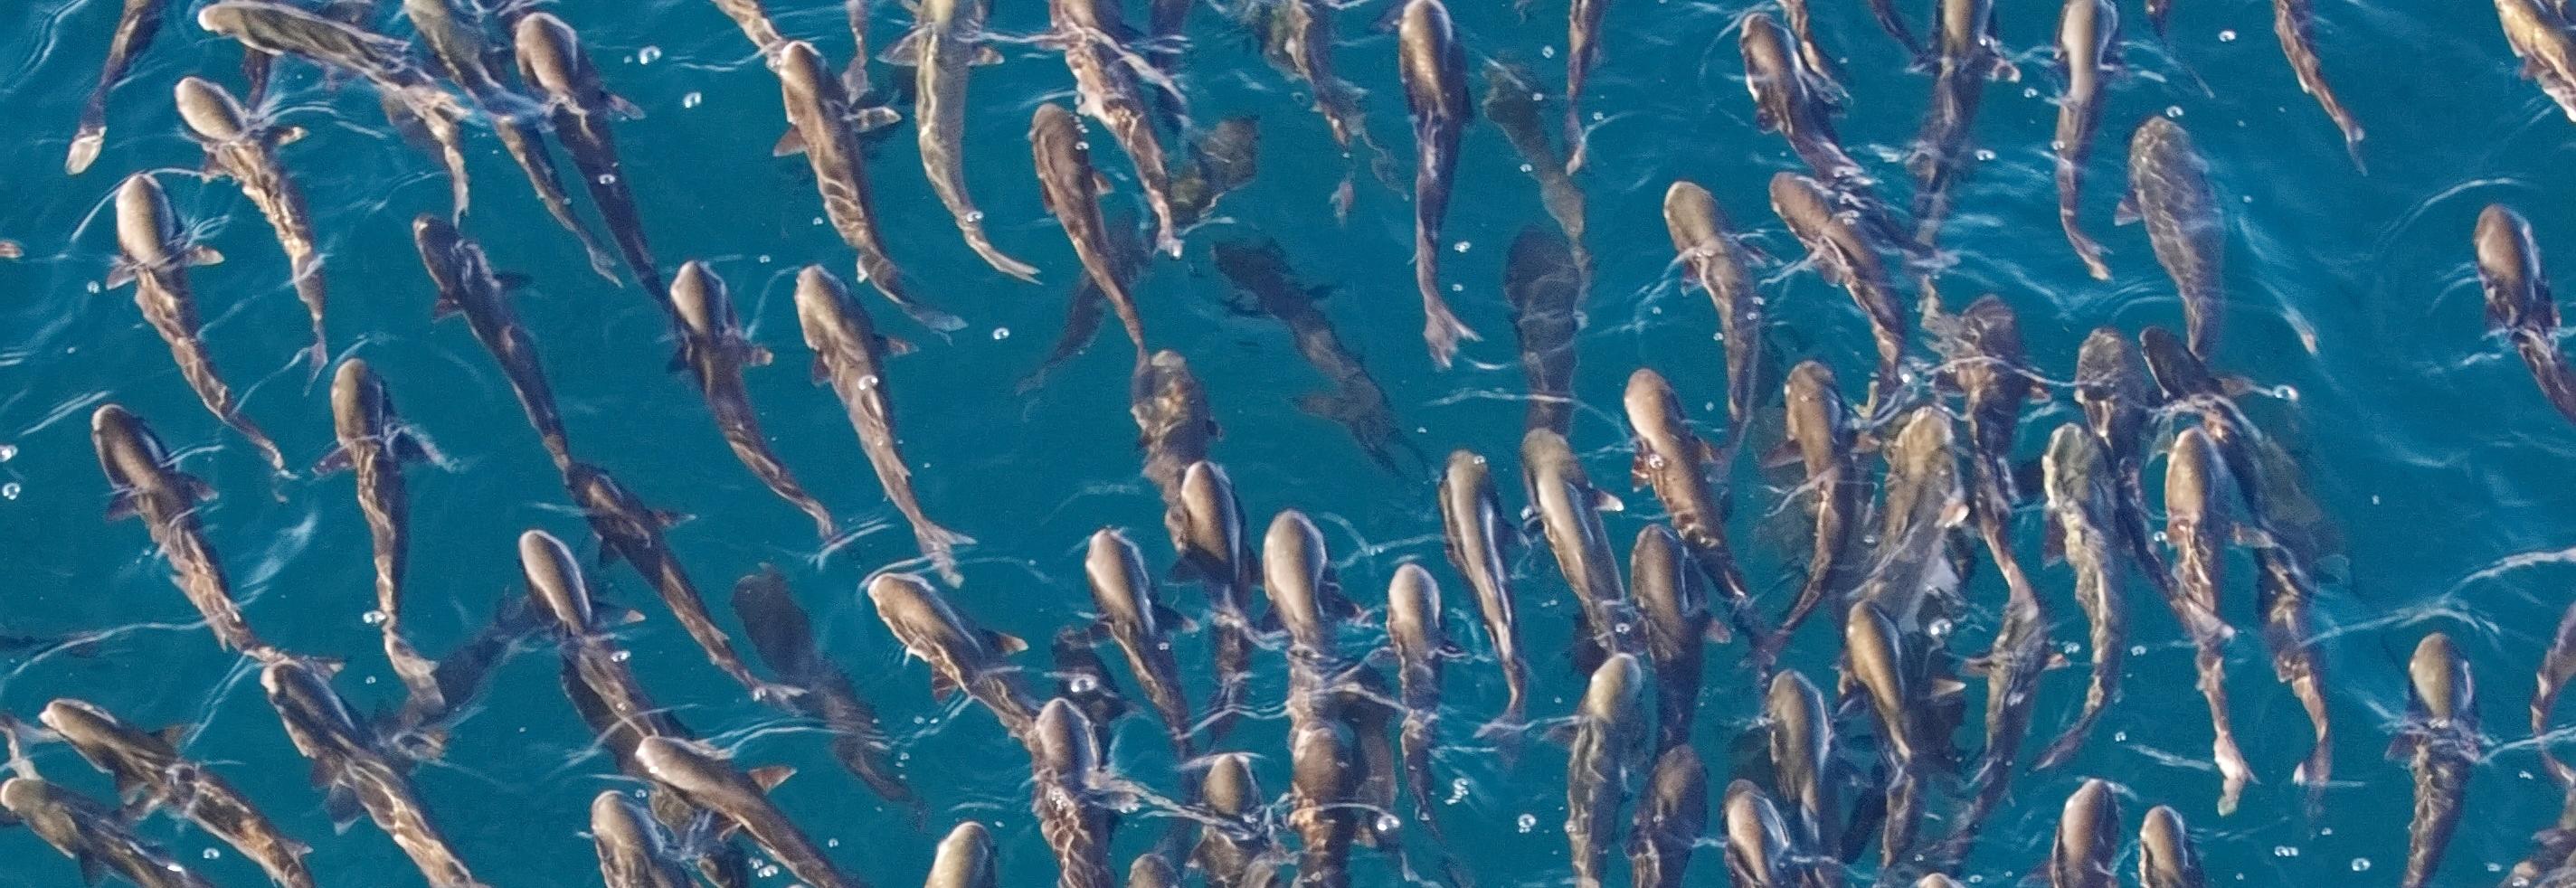 Image of a shoal of fish in open water from above, © Damir Mijailovic from Pexels